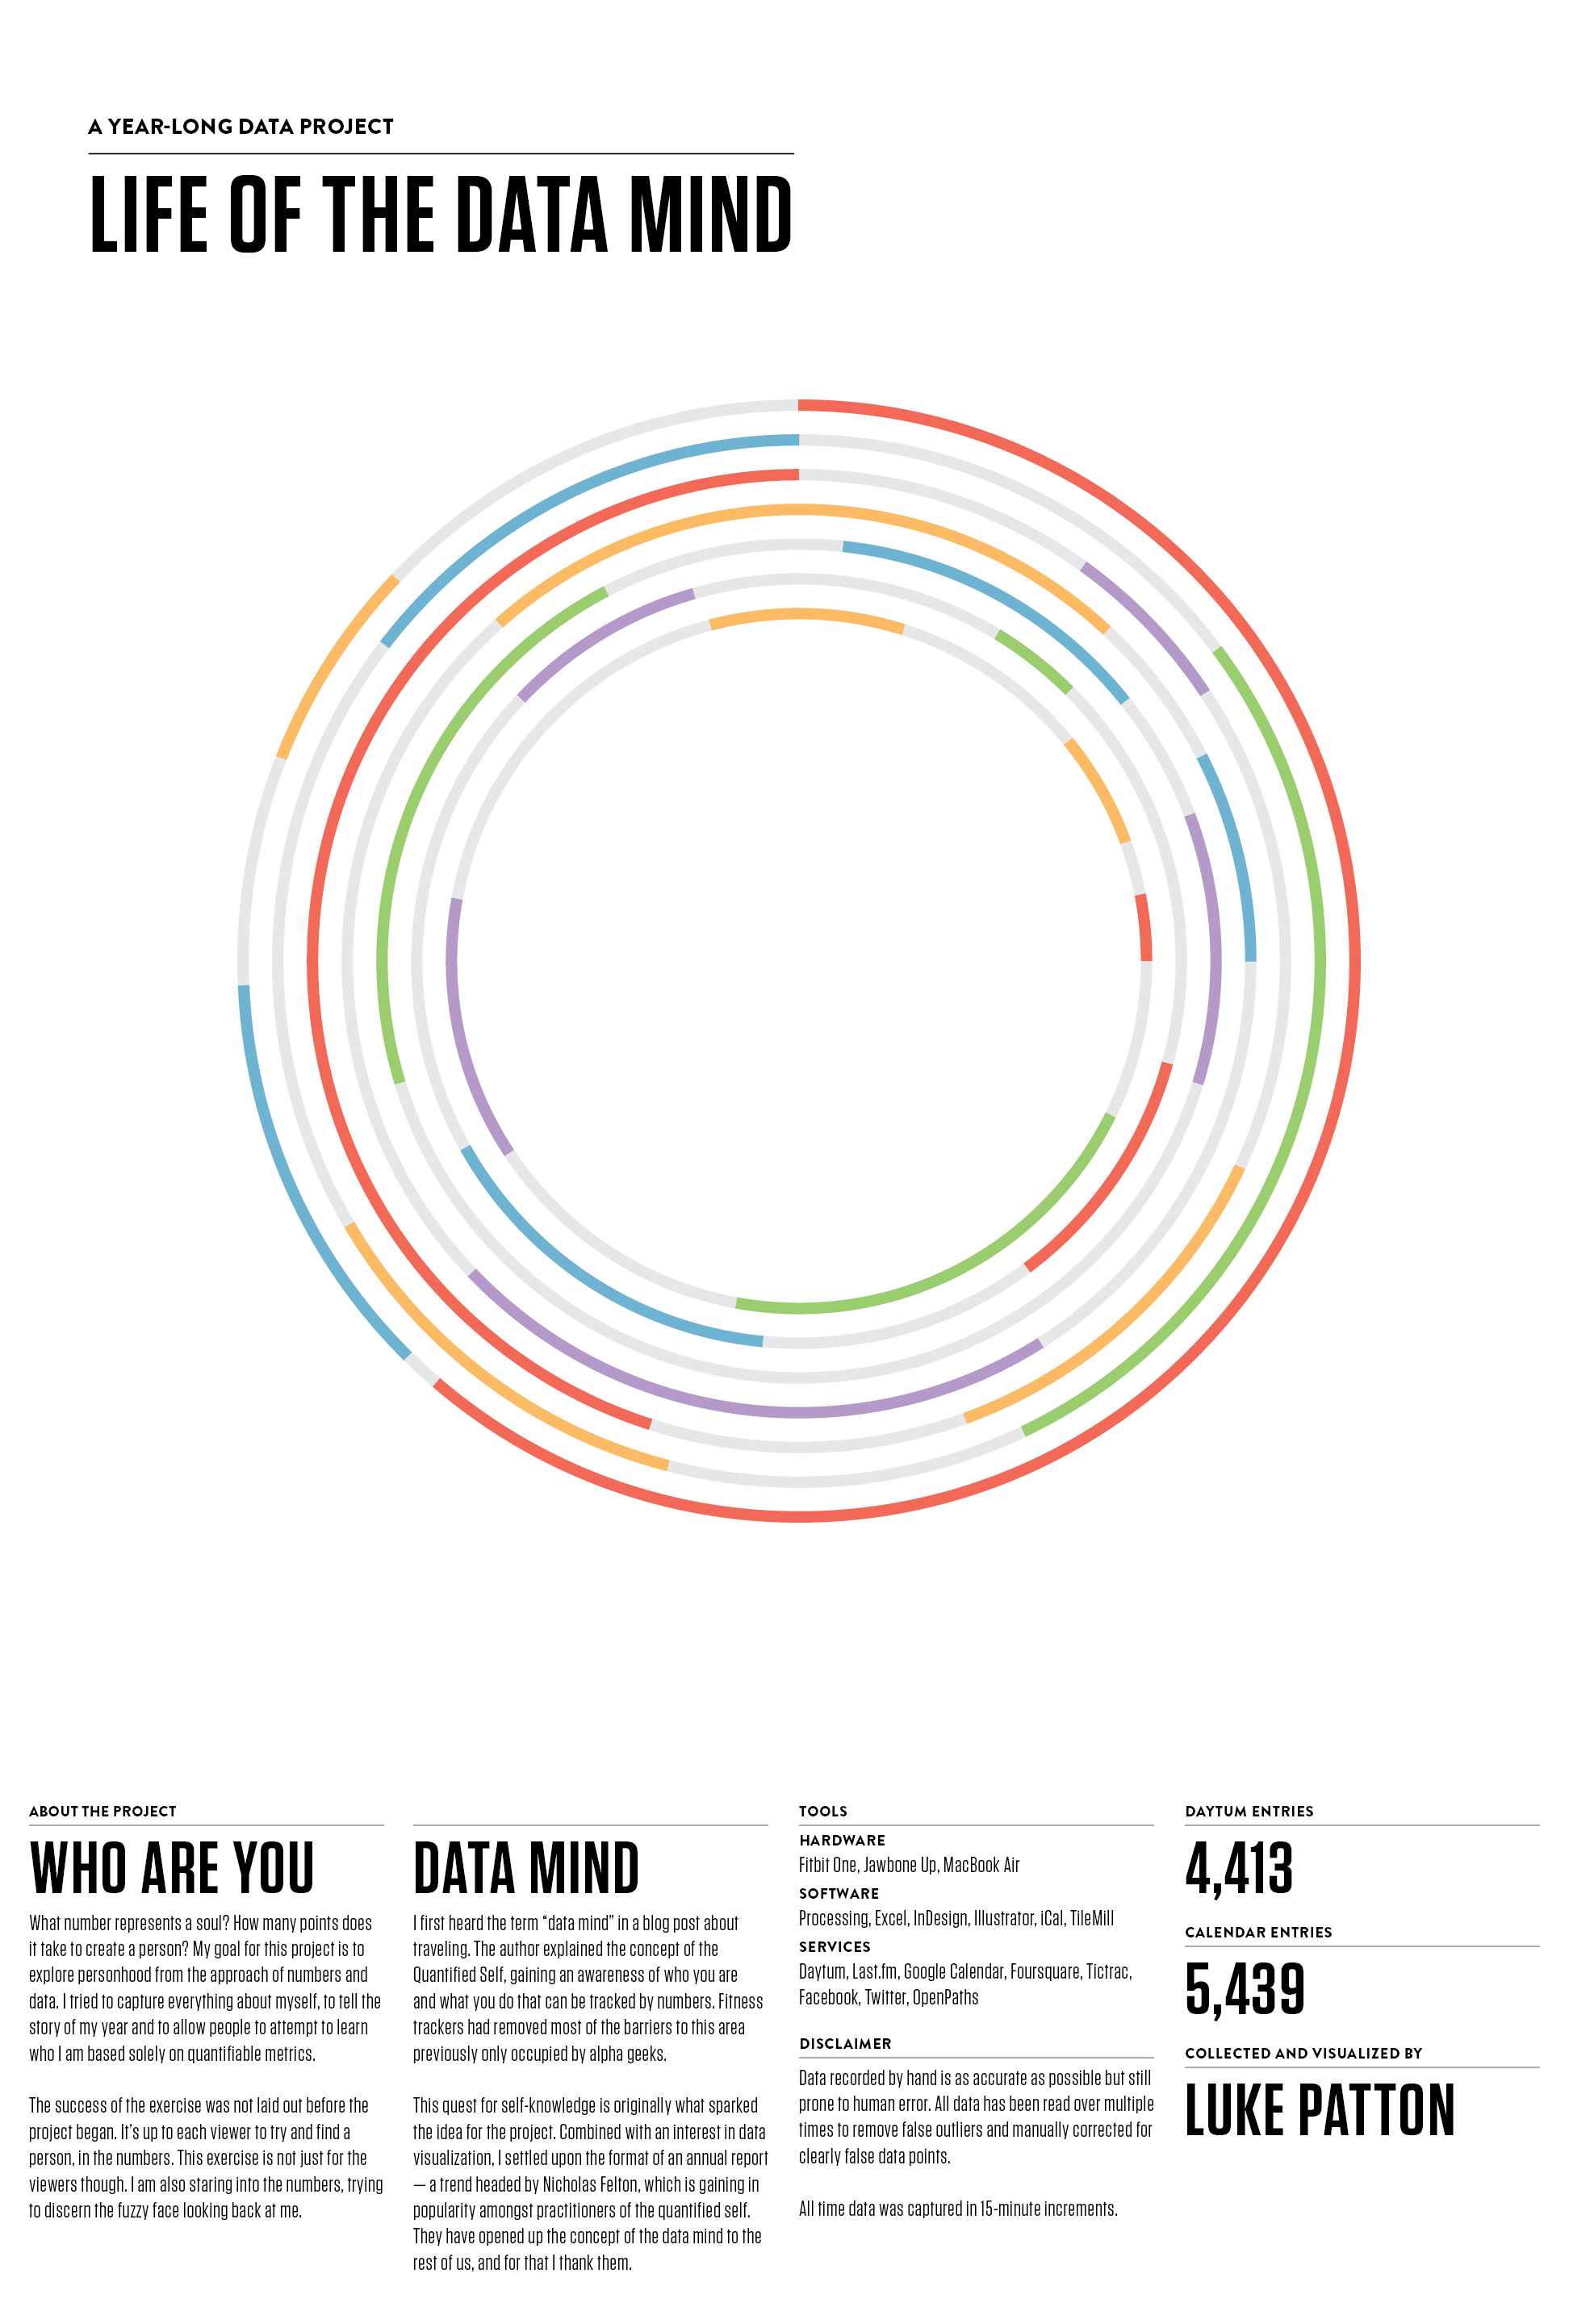 The cover poster for the Life of the Data Mind art project